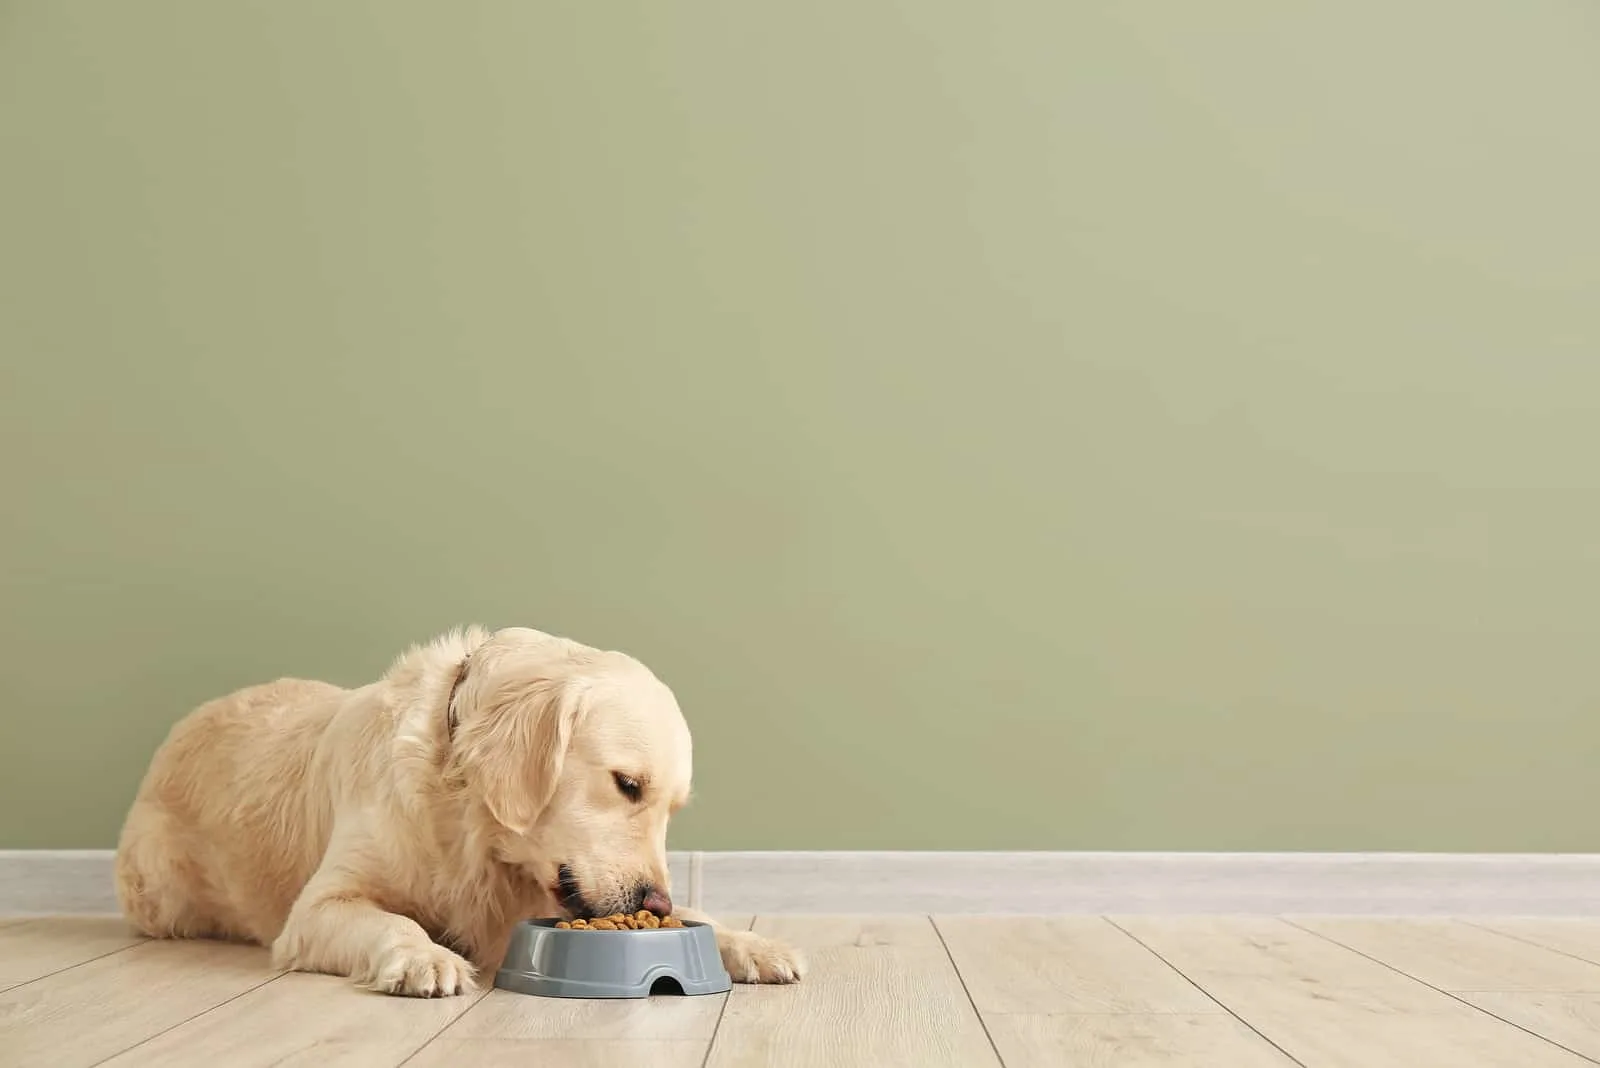 labrador dog eats from a bowl of crackers